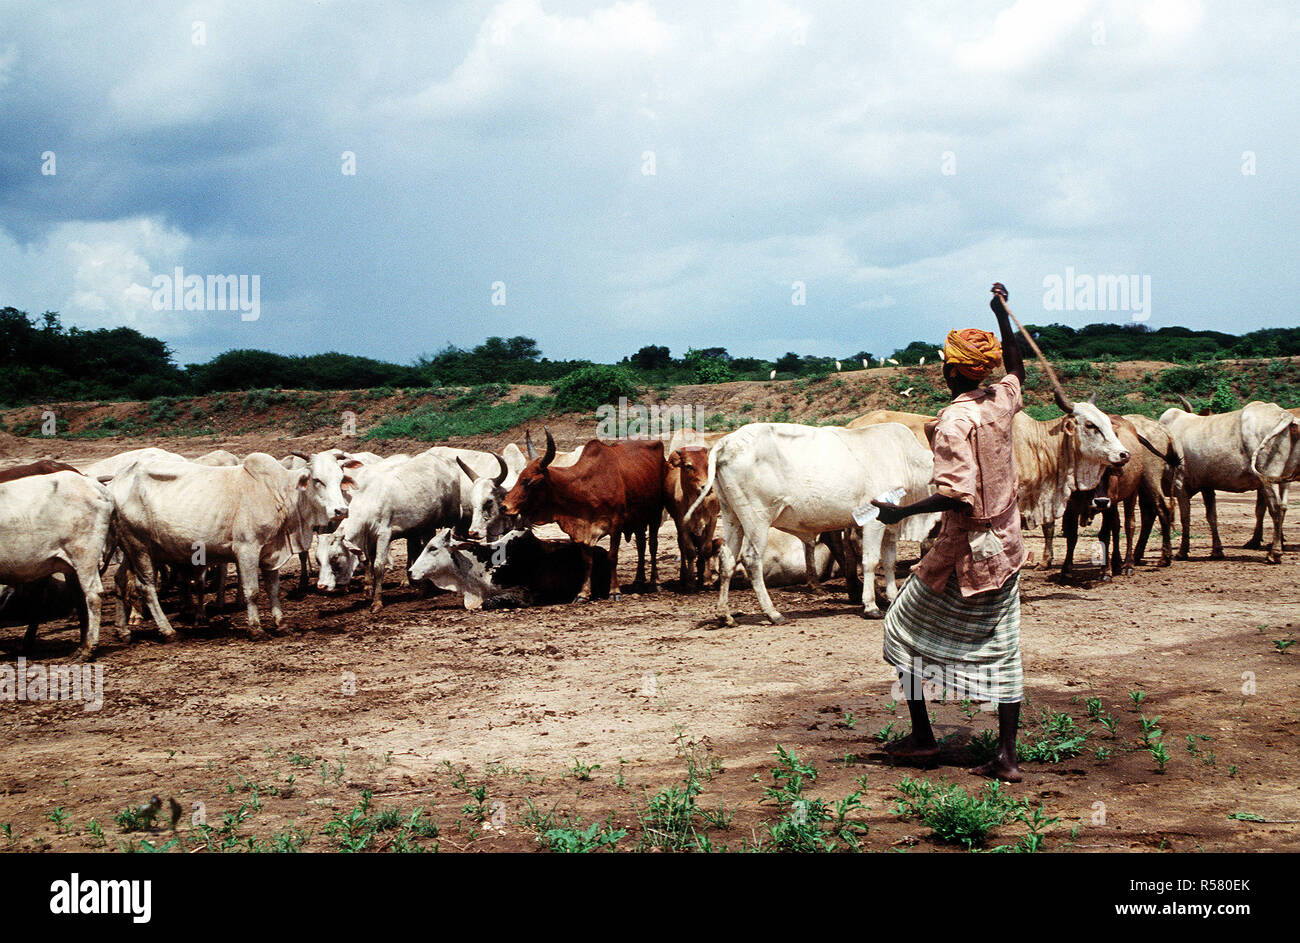 1993 - A Somali rancher herds cattle in Kismayo, Somalia while U.S. Forces were in Somalia for Operation Continue Hope. Stock Photo